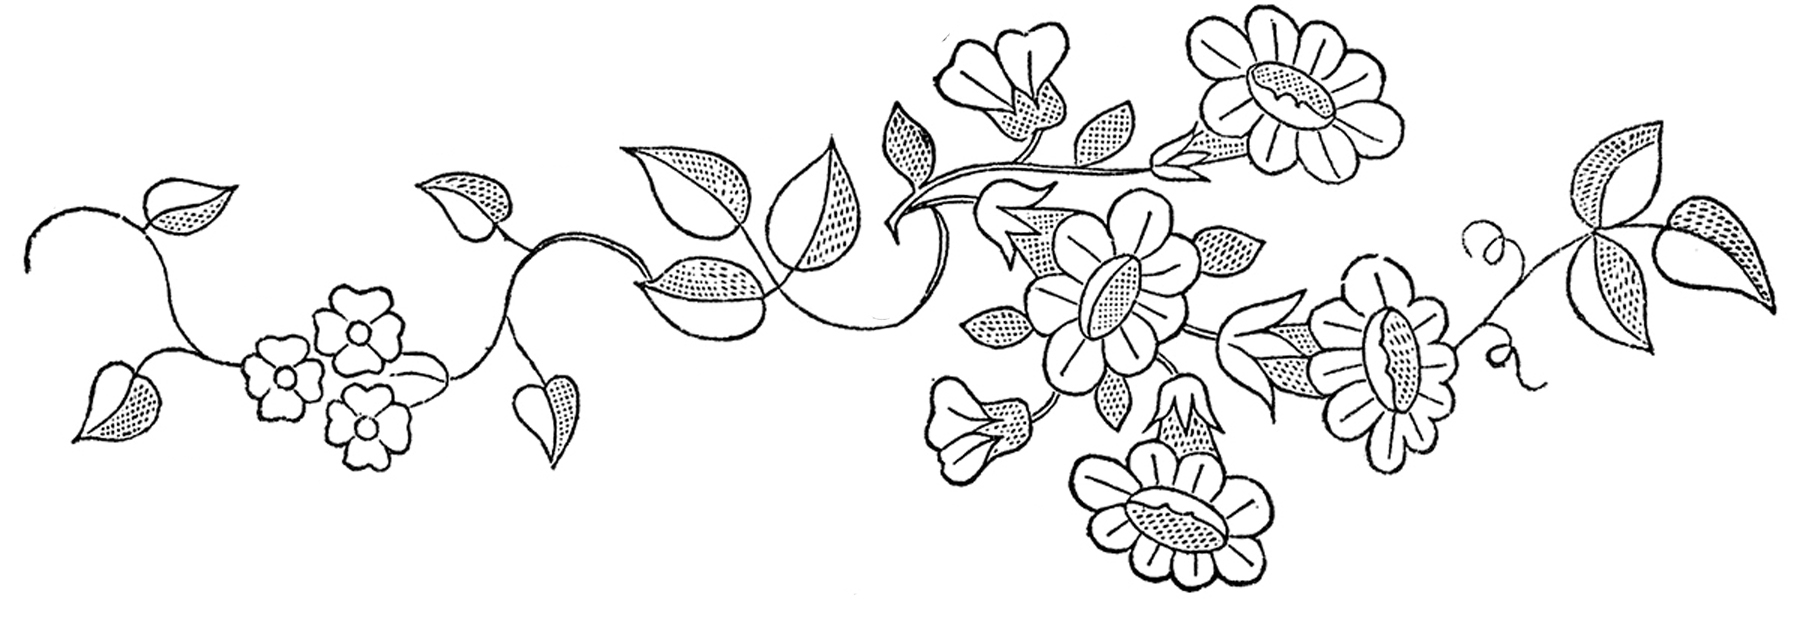 Flower Embroidery Pattern Floral Embroidery Patterns Pretty The Graphics Fairy